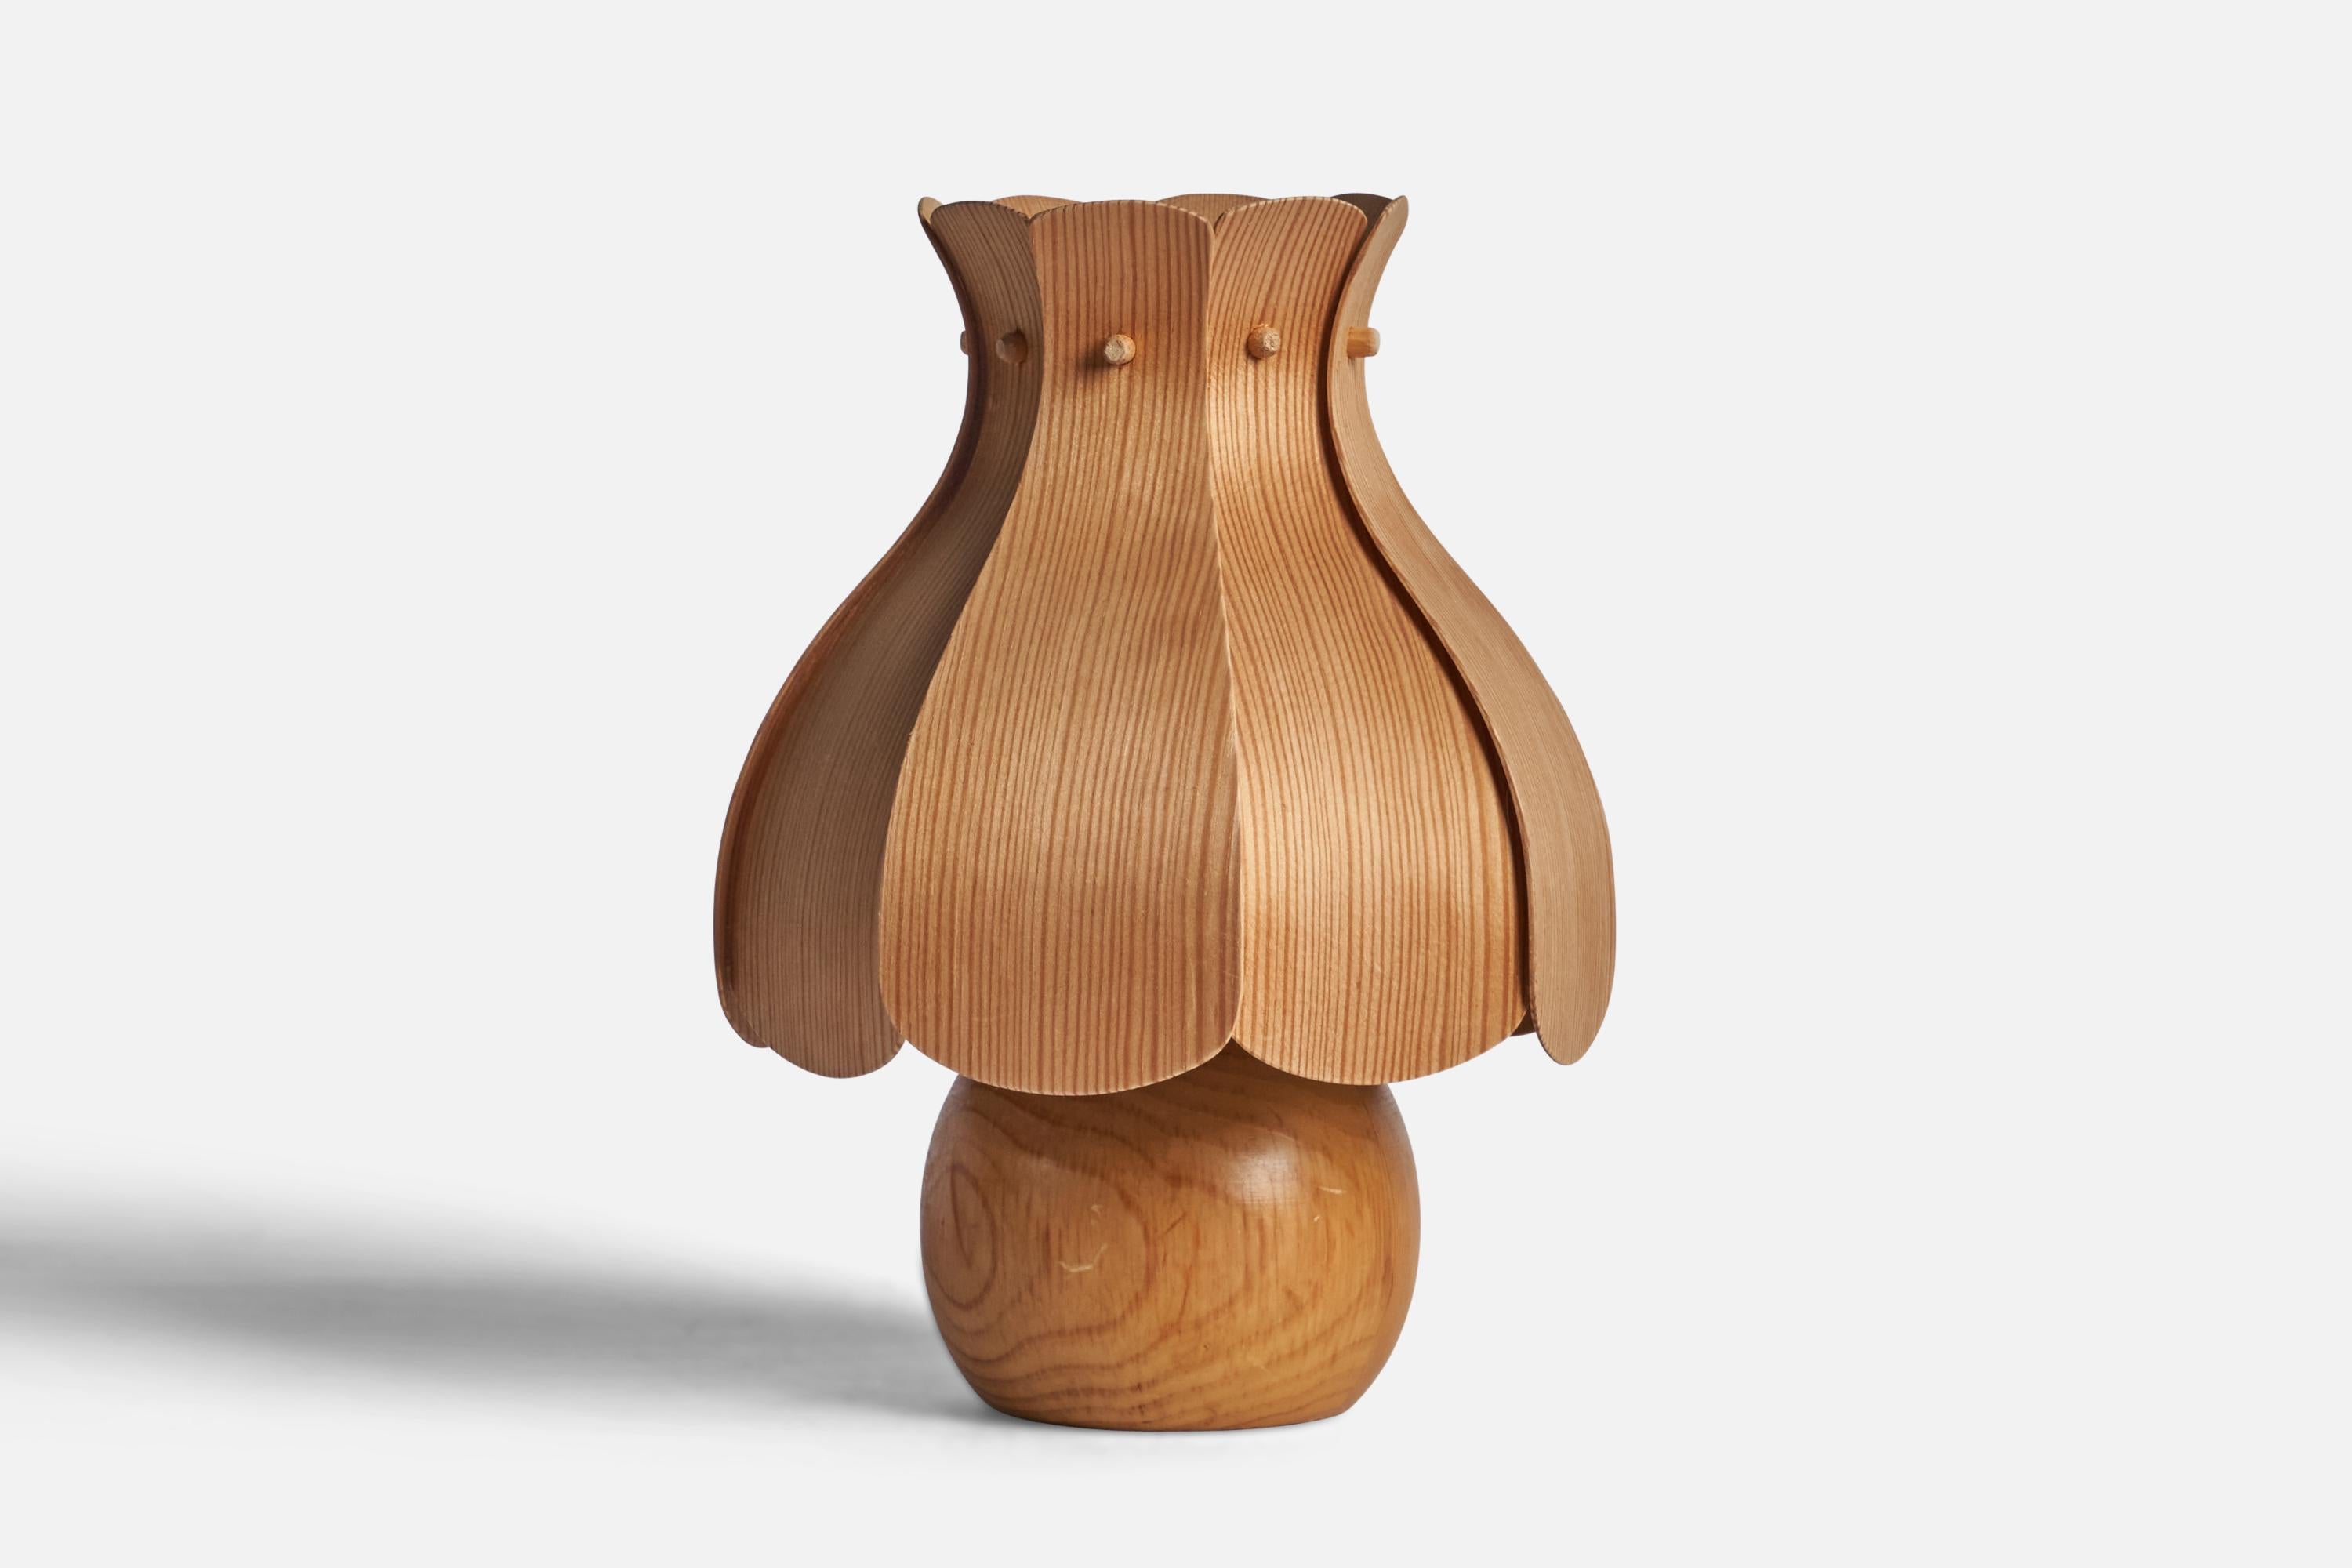 A pine and moulded pine veneer table lamp designed and produced in Sweden, 1970s.

Overall Dimensions (inches): 10.75” H x 7.5” Diameter
Bulb Specifications: E-26 Bulb
Number of Sockets: 1
All lighting will be converted for US usage. We are unable